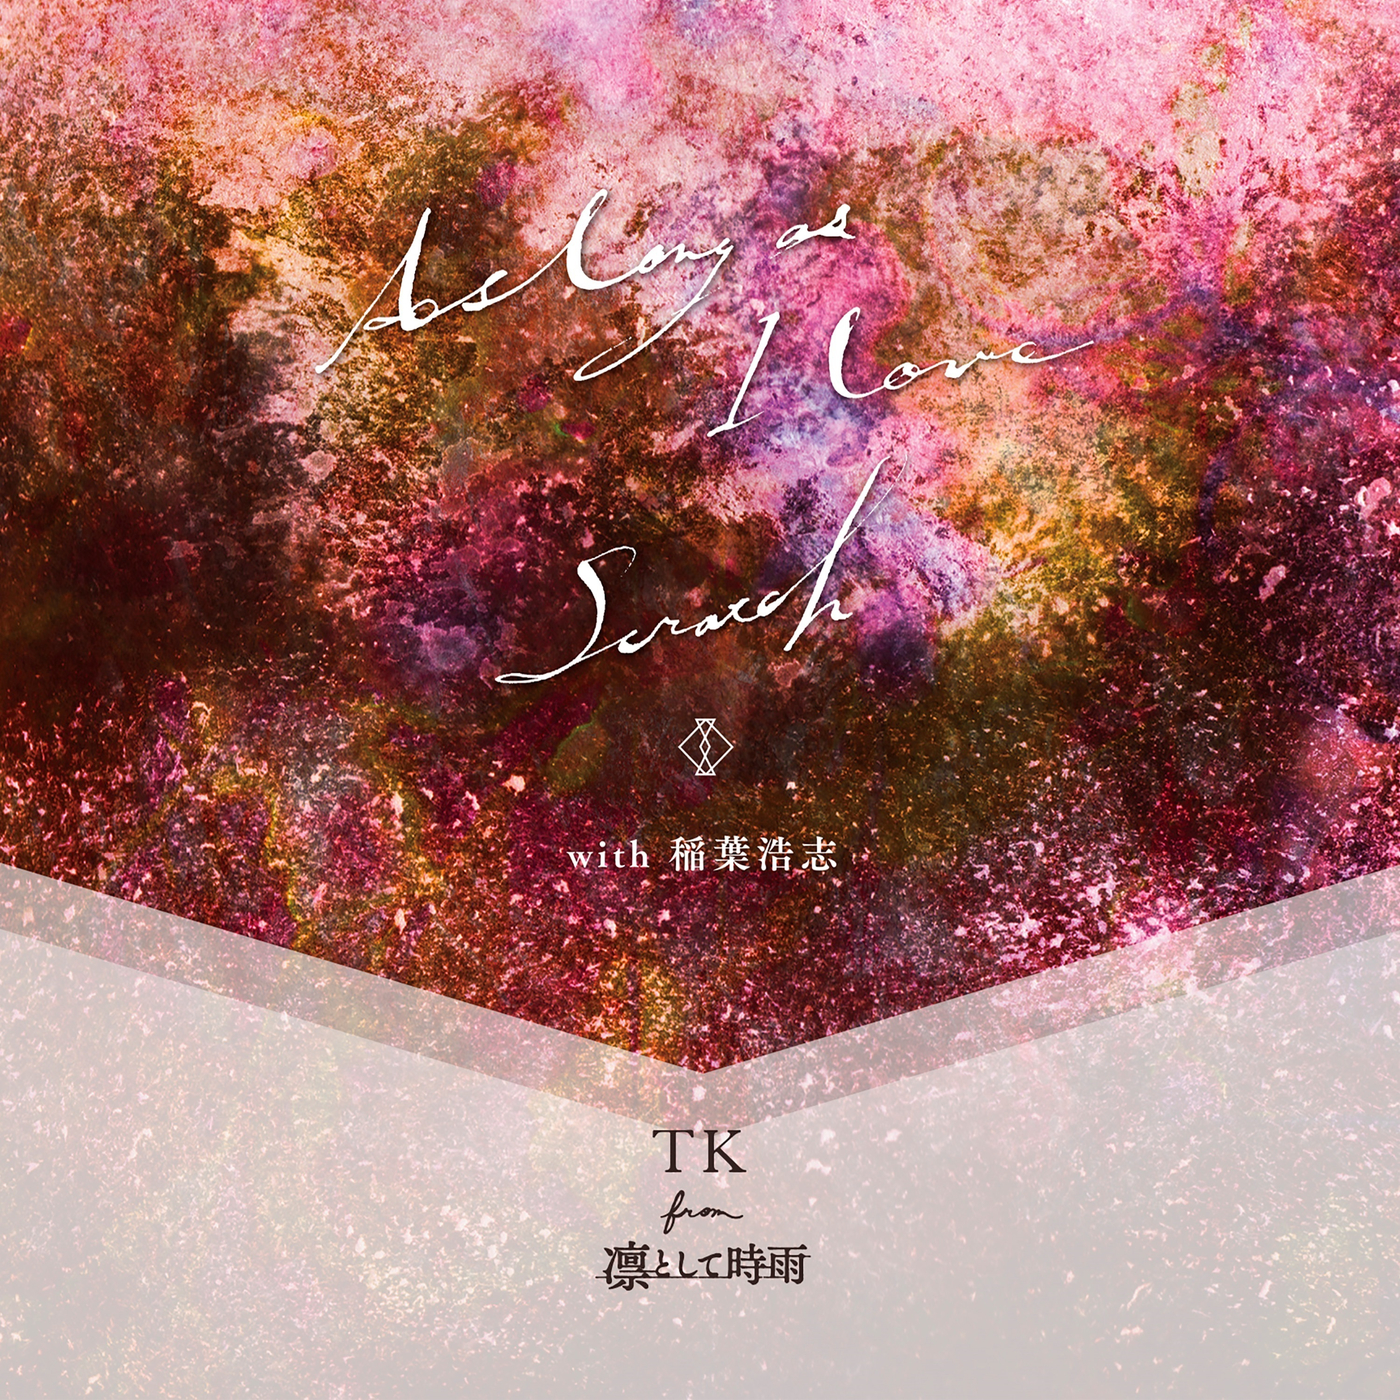 [220316]TK from 凛として時雨( with 稲葉浩志) – As long as I love ／ Scratch[320K]插图icecomic动漫-云之彼端,约定的地方(´･ᴗ･`)